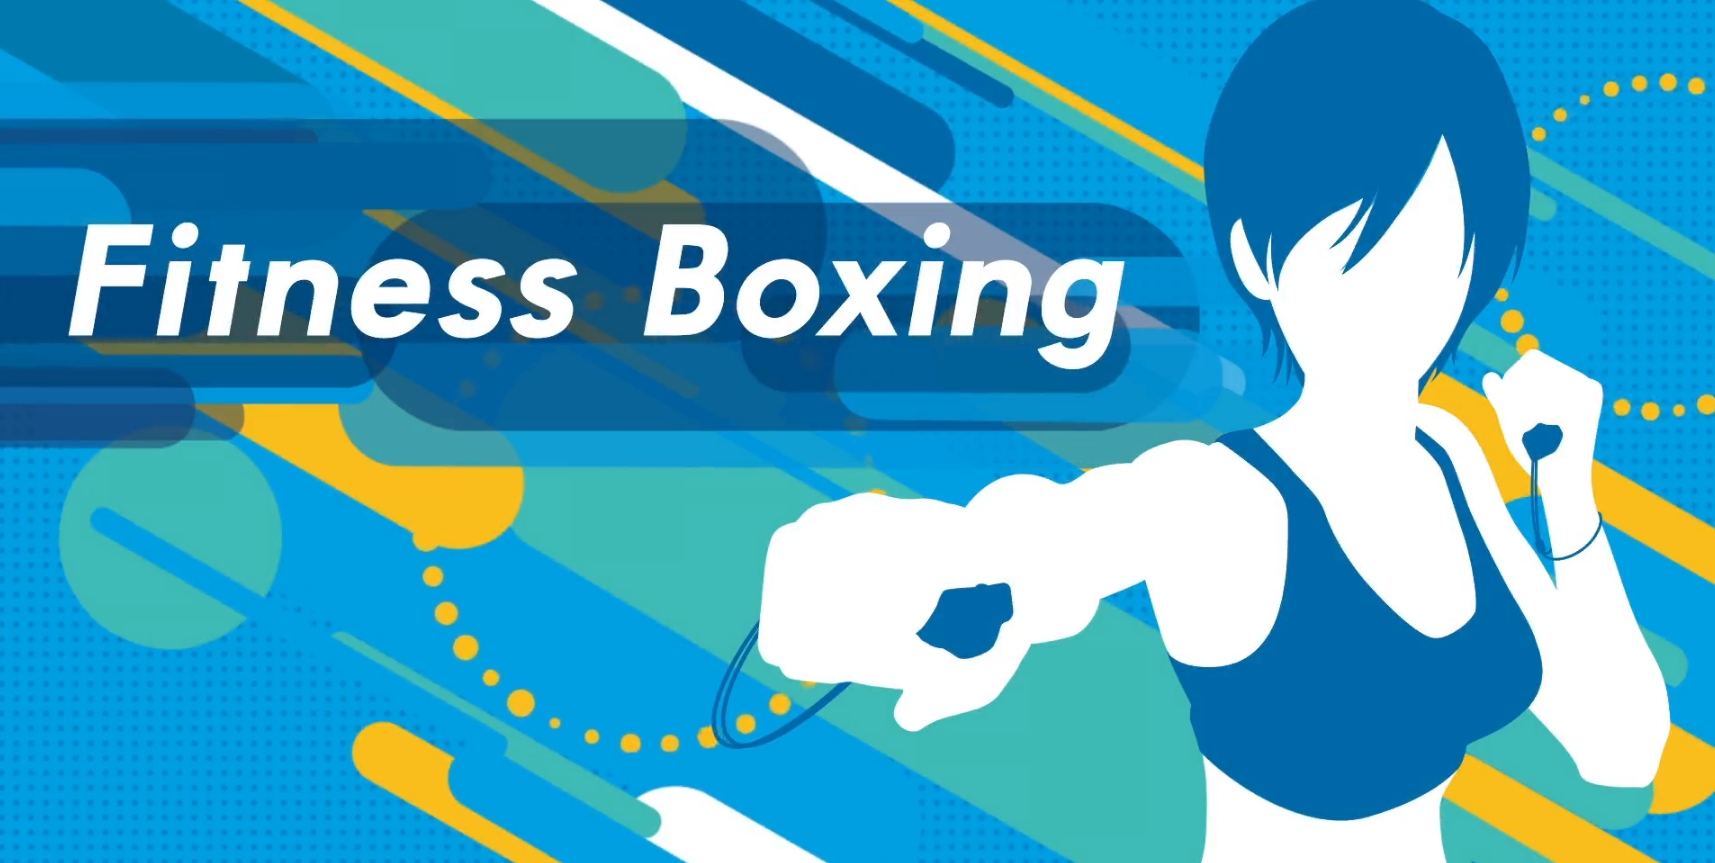 Nintendo Switch Fitness Boxing Exceeds 700,000 Worldwide Shipments